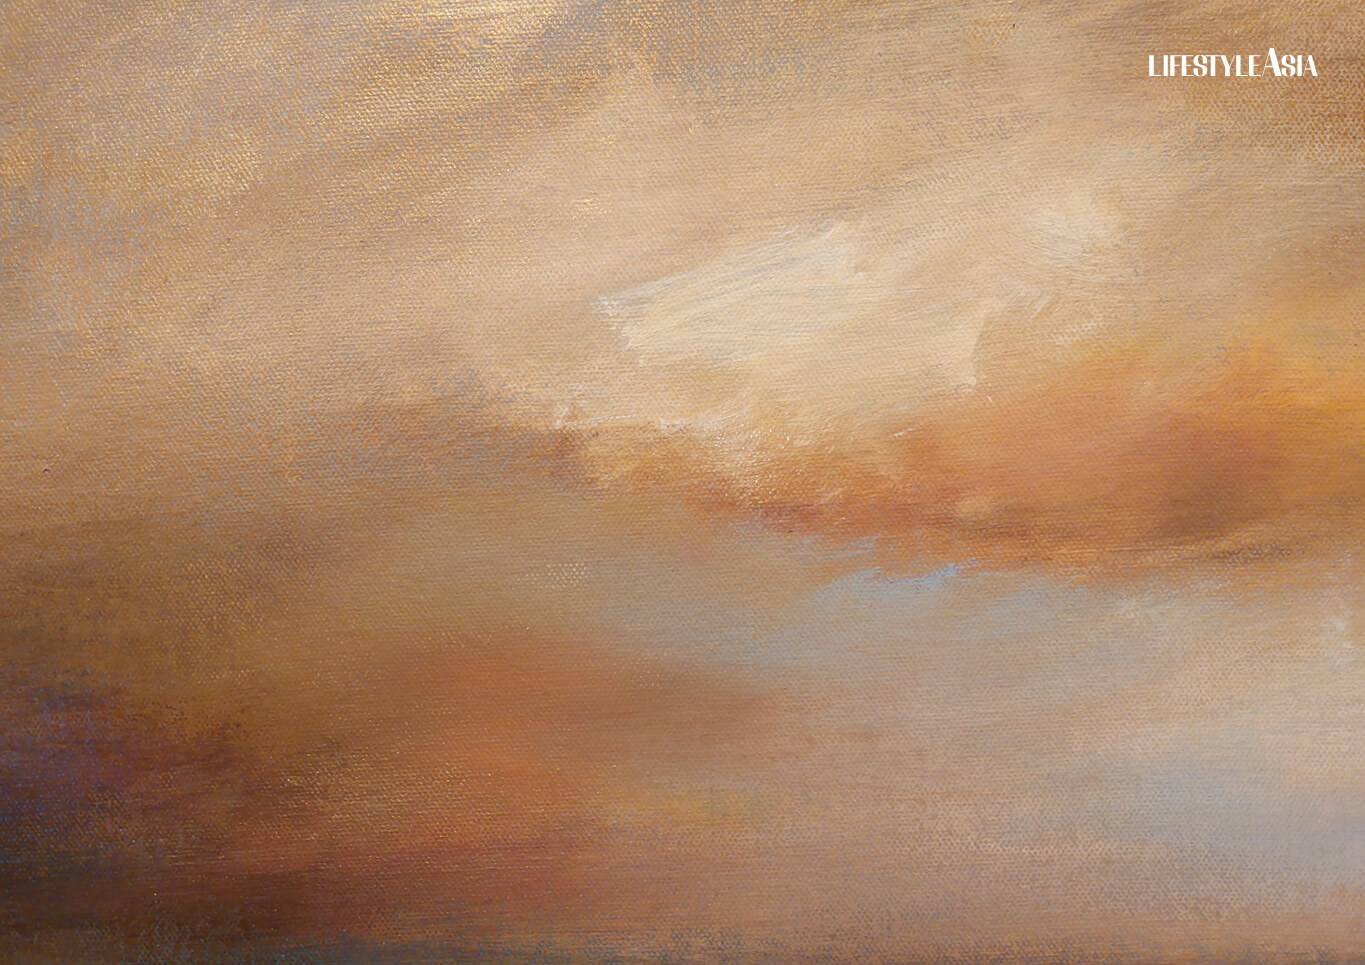 Close-ups of Kenneth Montegrande's seascapes and cloudscapes in "The Greatness of Simplicity"